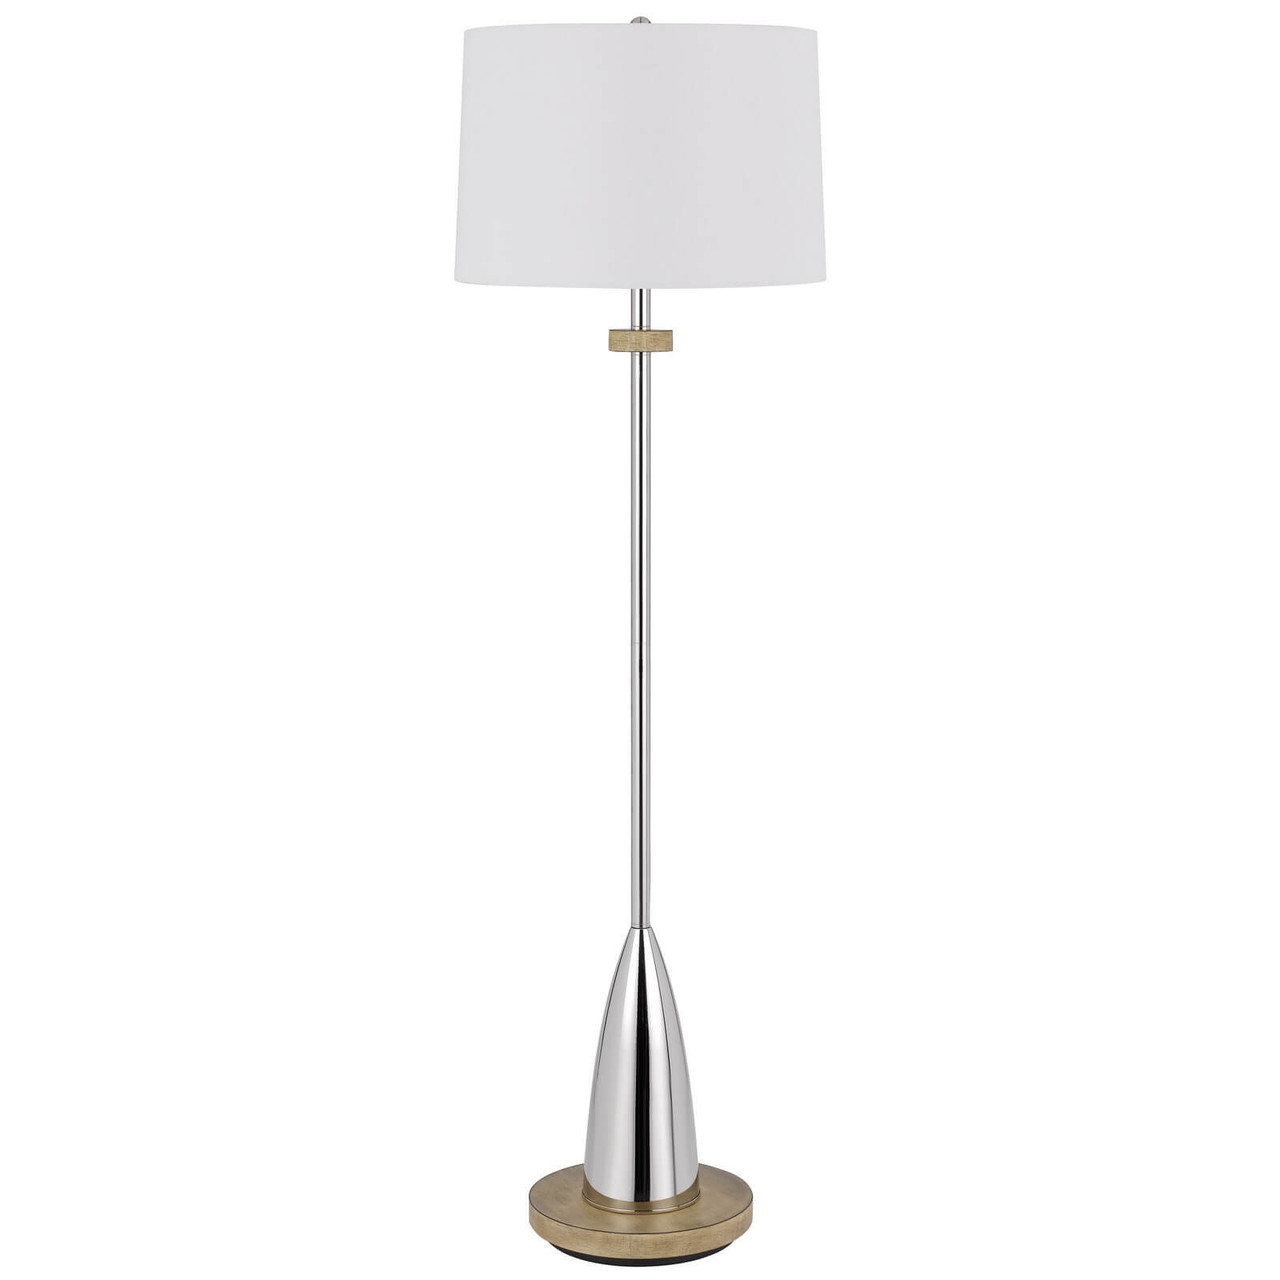 61" Chrome Traditional Shaped Floor Lamp With White Square Shade - Chicken Pieces